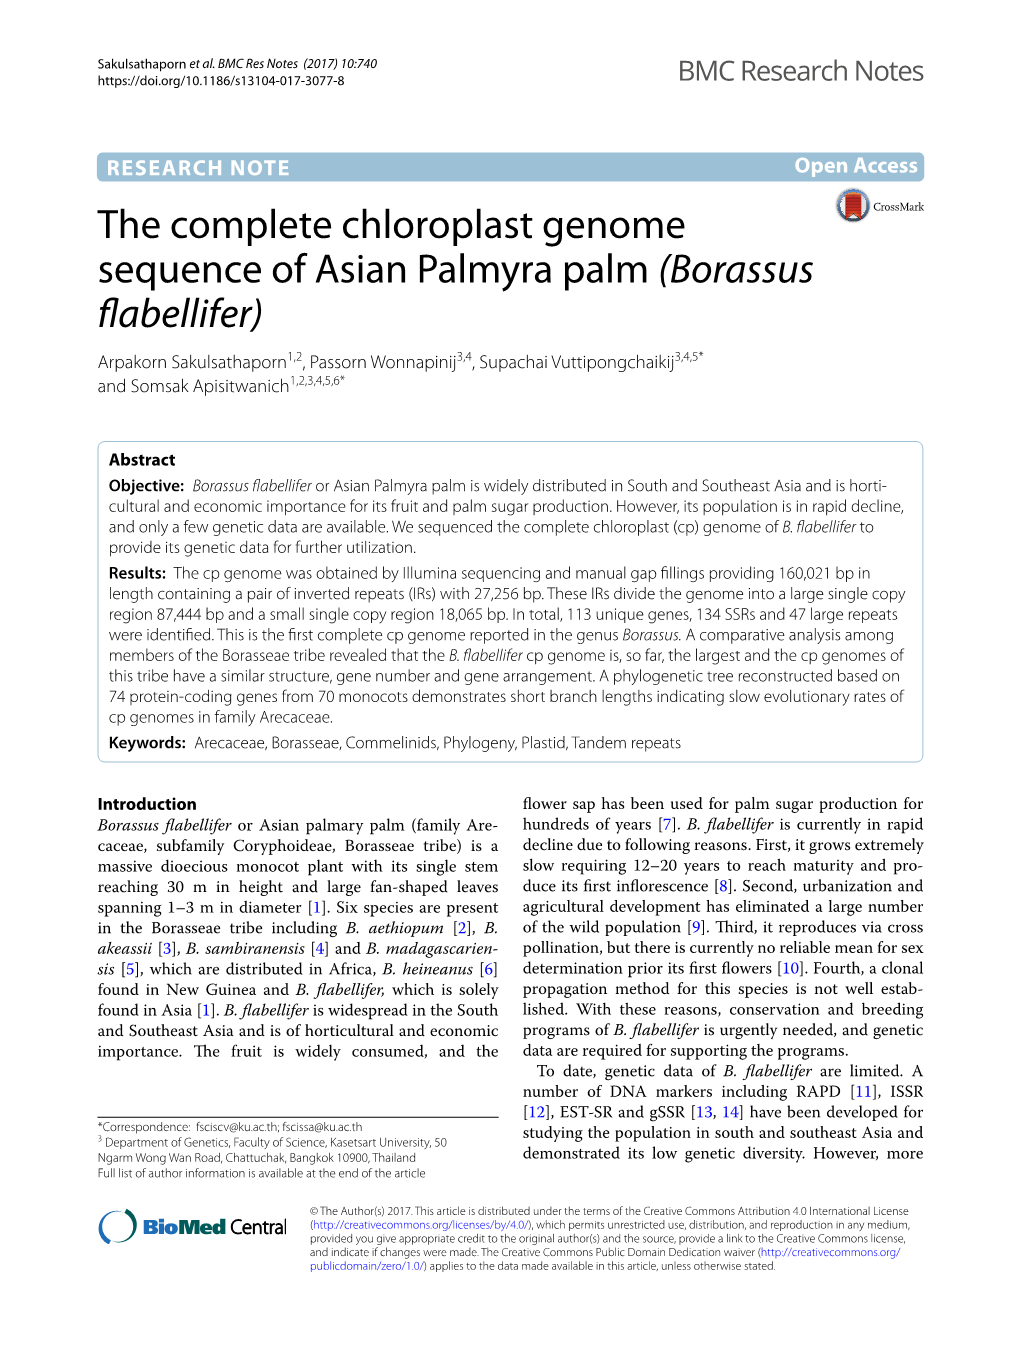 The Complete Chloroplast Genome Sequence of Asian Palmyra Palm